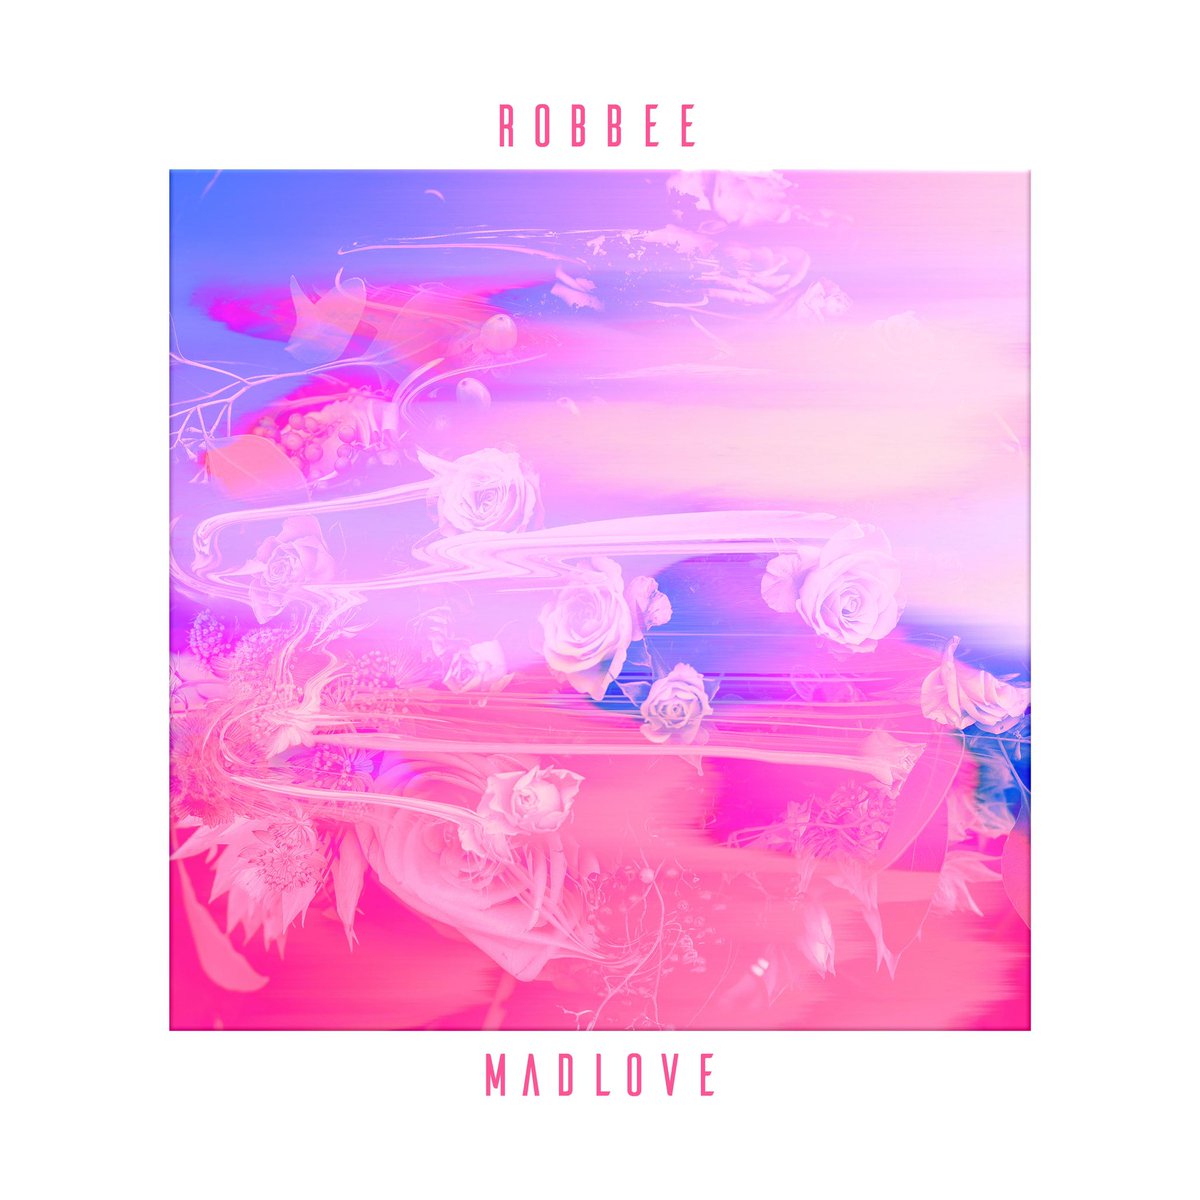 Hi everyone! After many months of putting it off and being too nervous to try anything new with my music, I’ve decided, fuck it - might as well try haven’t I. So here it is - @robbeemusic I have a new song coming out this Friday 9/07/2021 called MAD LOVE Link in bio for PRE SAVE